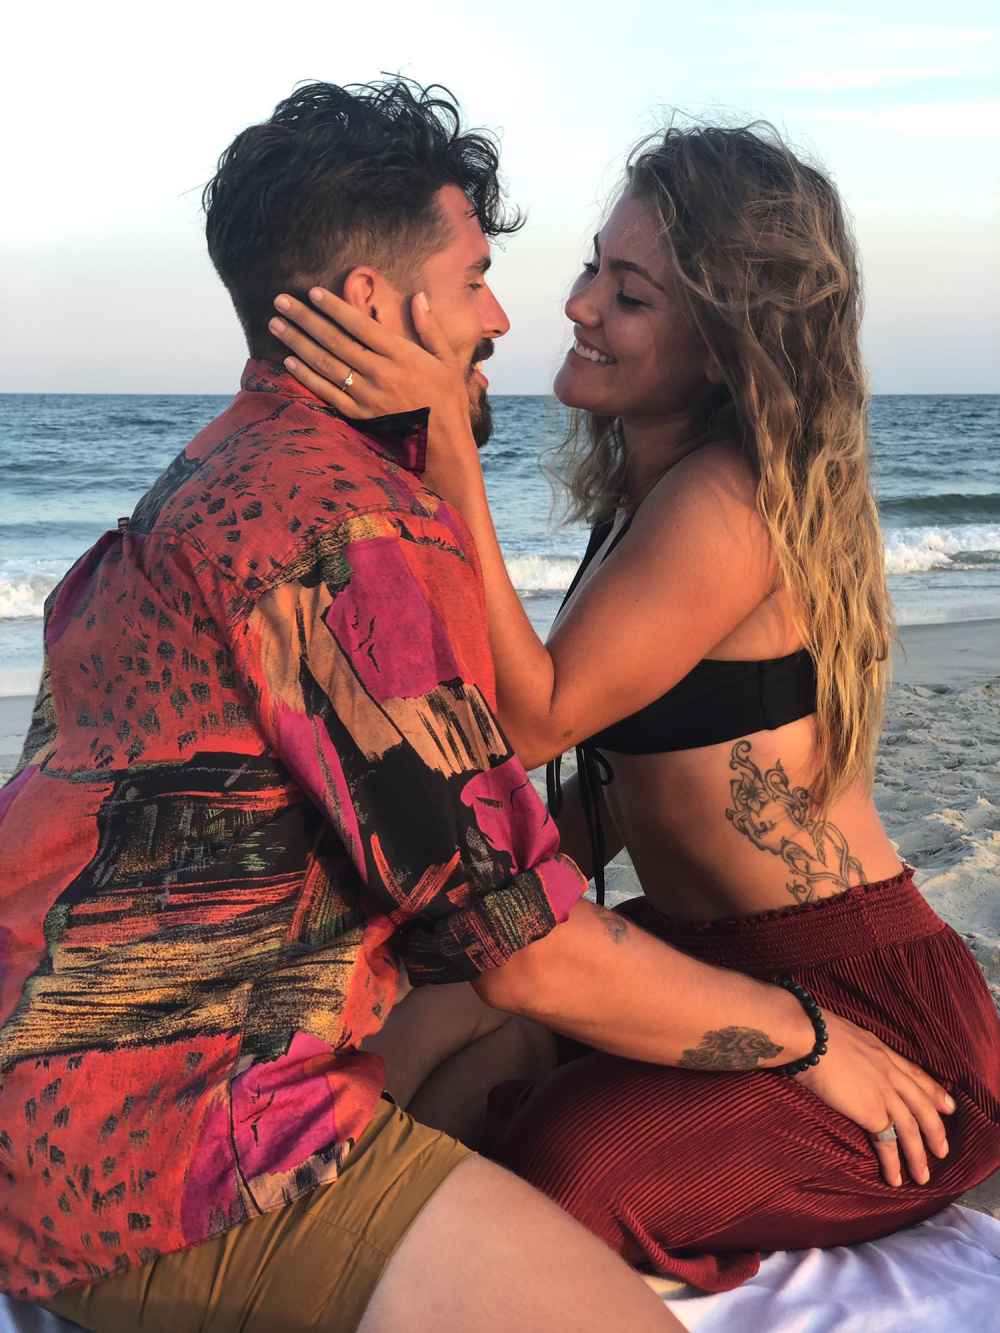 Jordan Wiseley and Tori Deal engagement The Challenge